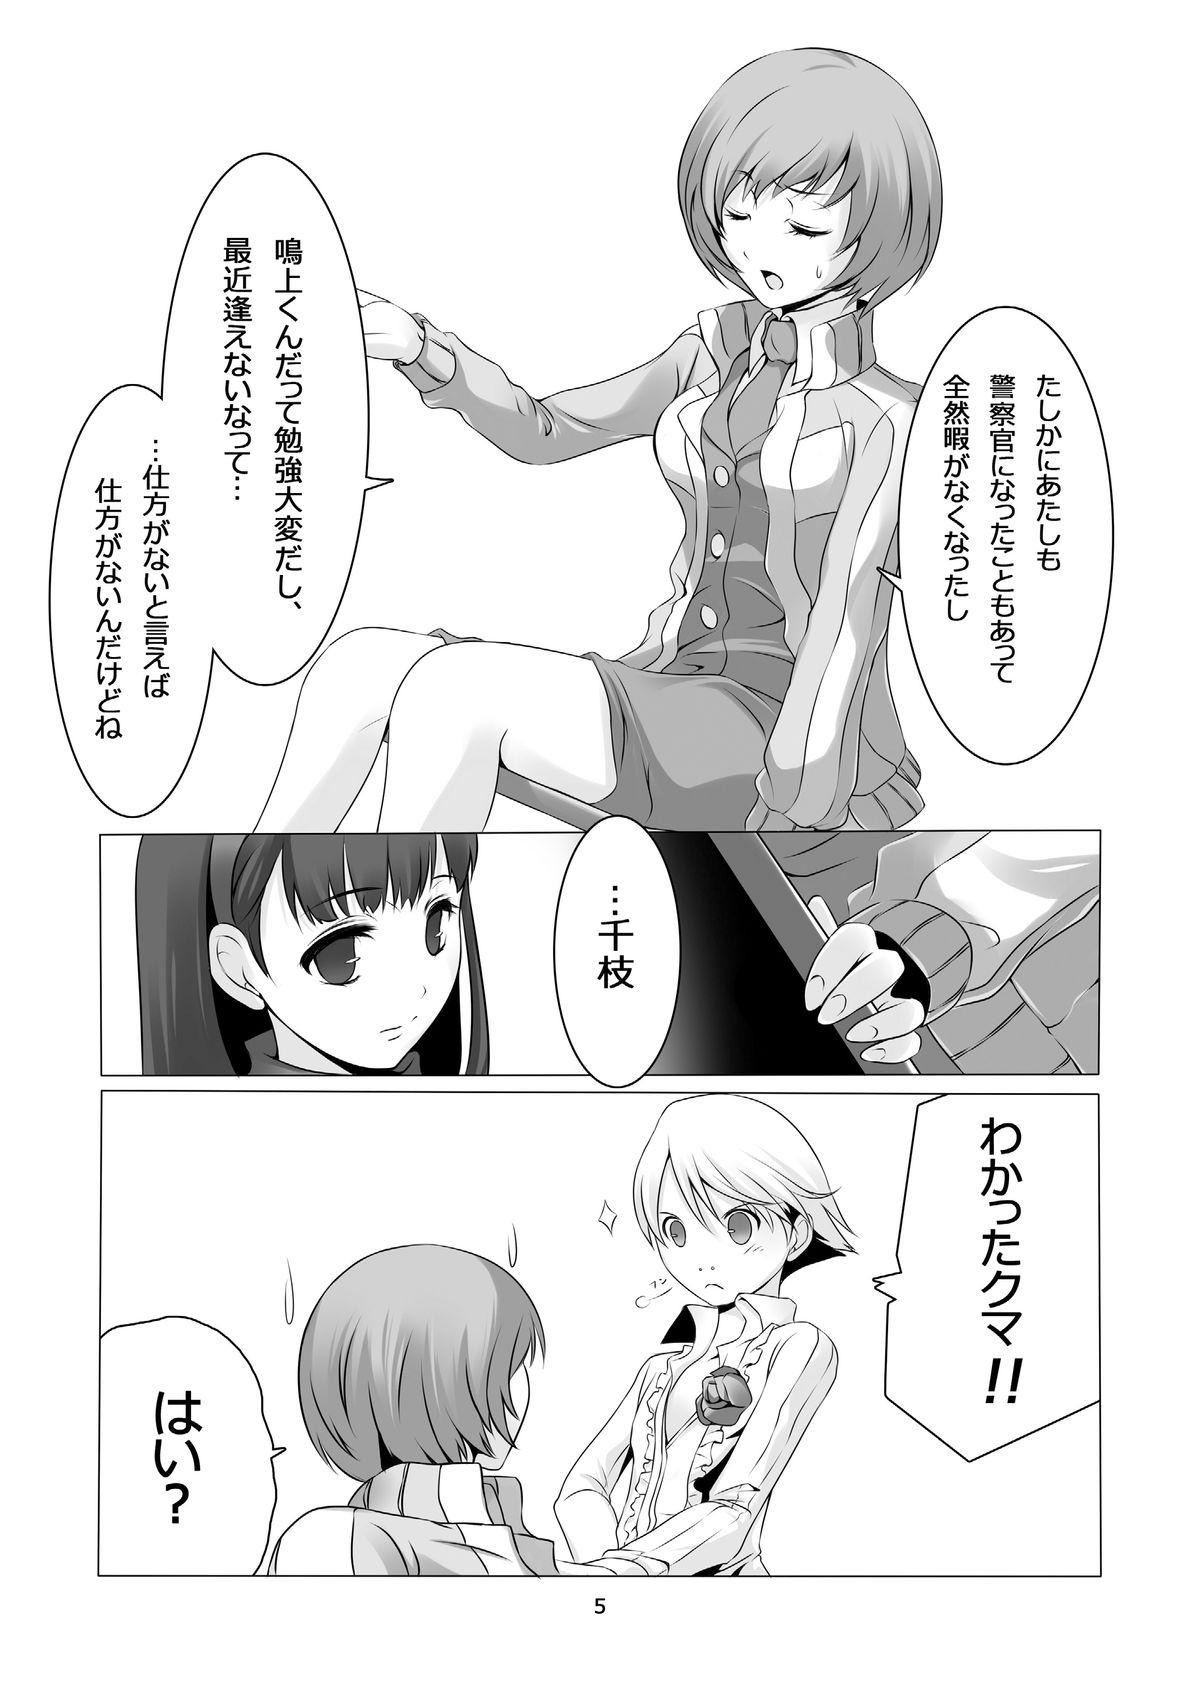 Olderwoman Persona 4: The Doujin #2 - Persona 4 Babes - Page 7